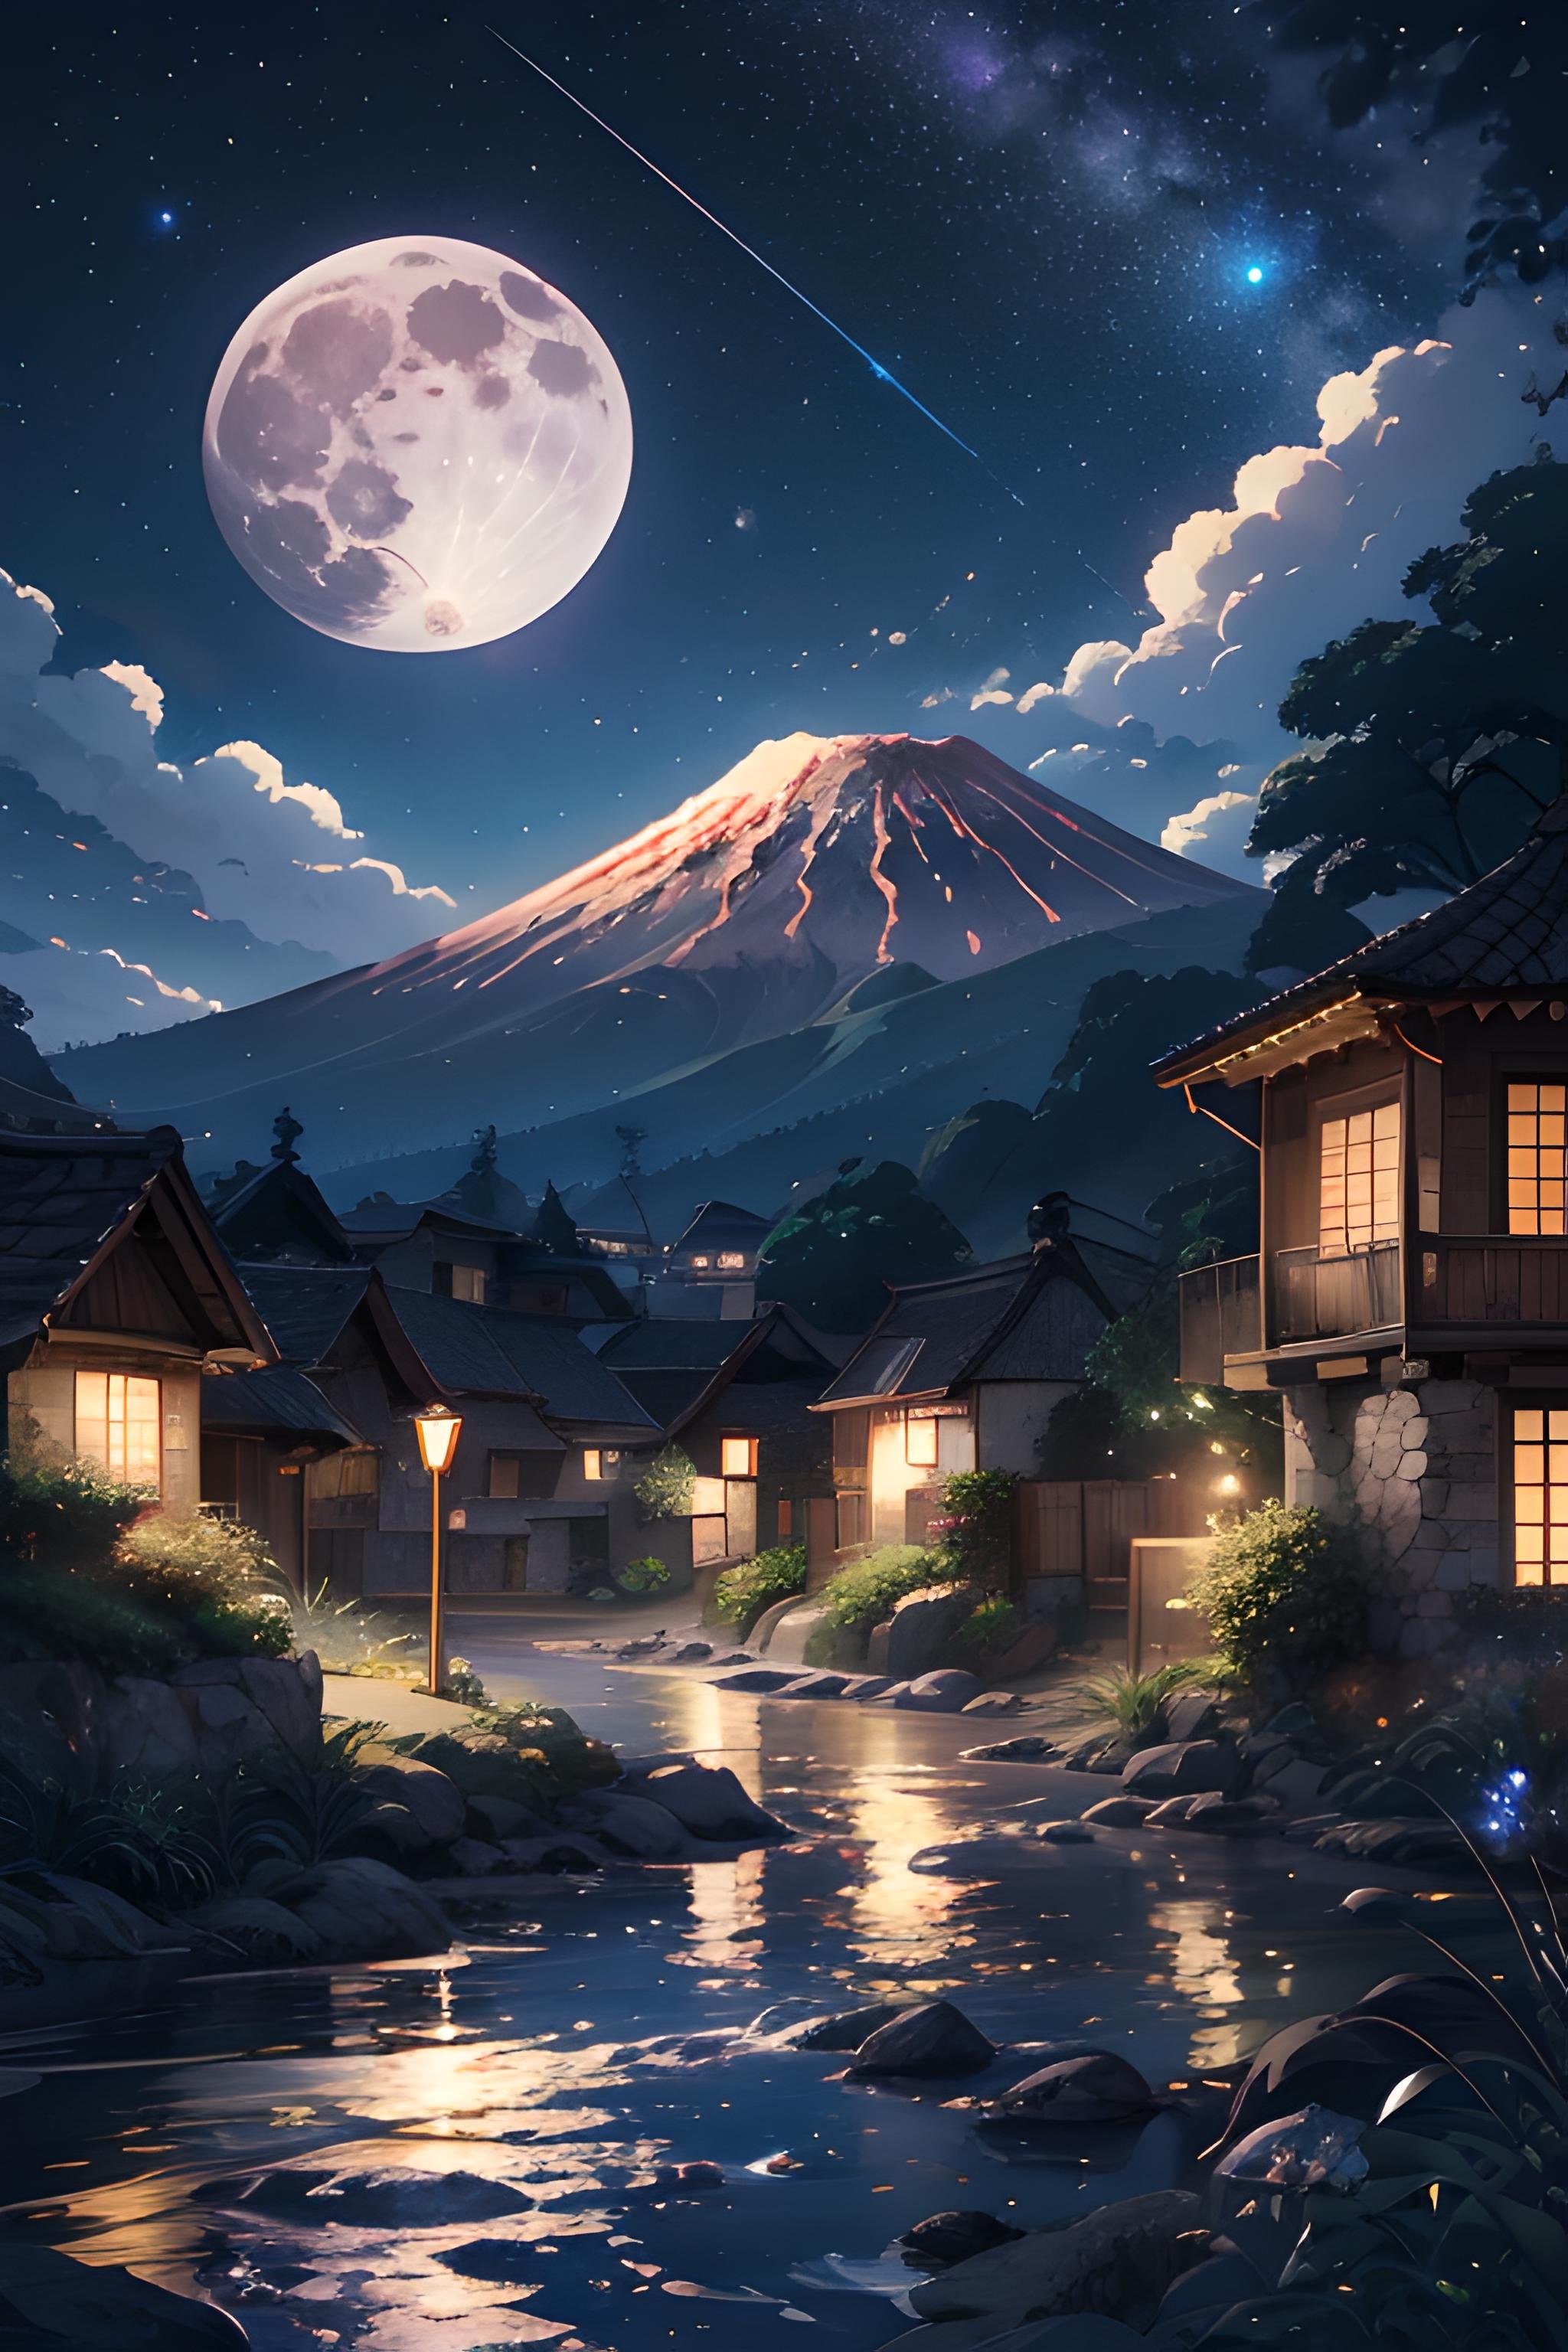 a night scene with a full moon in the sky, detailed digital anime art, volcano valley, けもの, # digital 2 d, music album art, night time with starry sky, streaming on twitch, 2 5 6 x 2 5 6 pixels, fragments, devinart, unconnected, cover, blue hour, summer night, anime visual, flowing hills <lora:Fantasy_style_background:0.7>